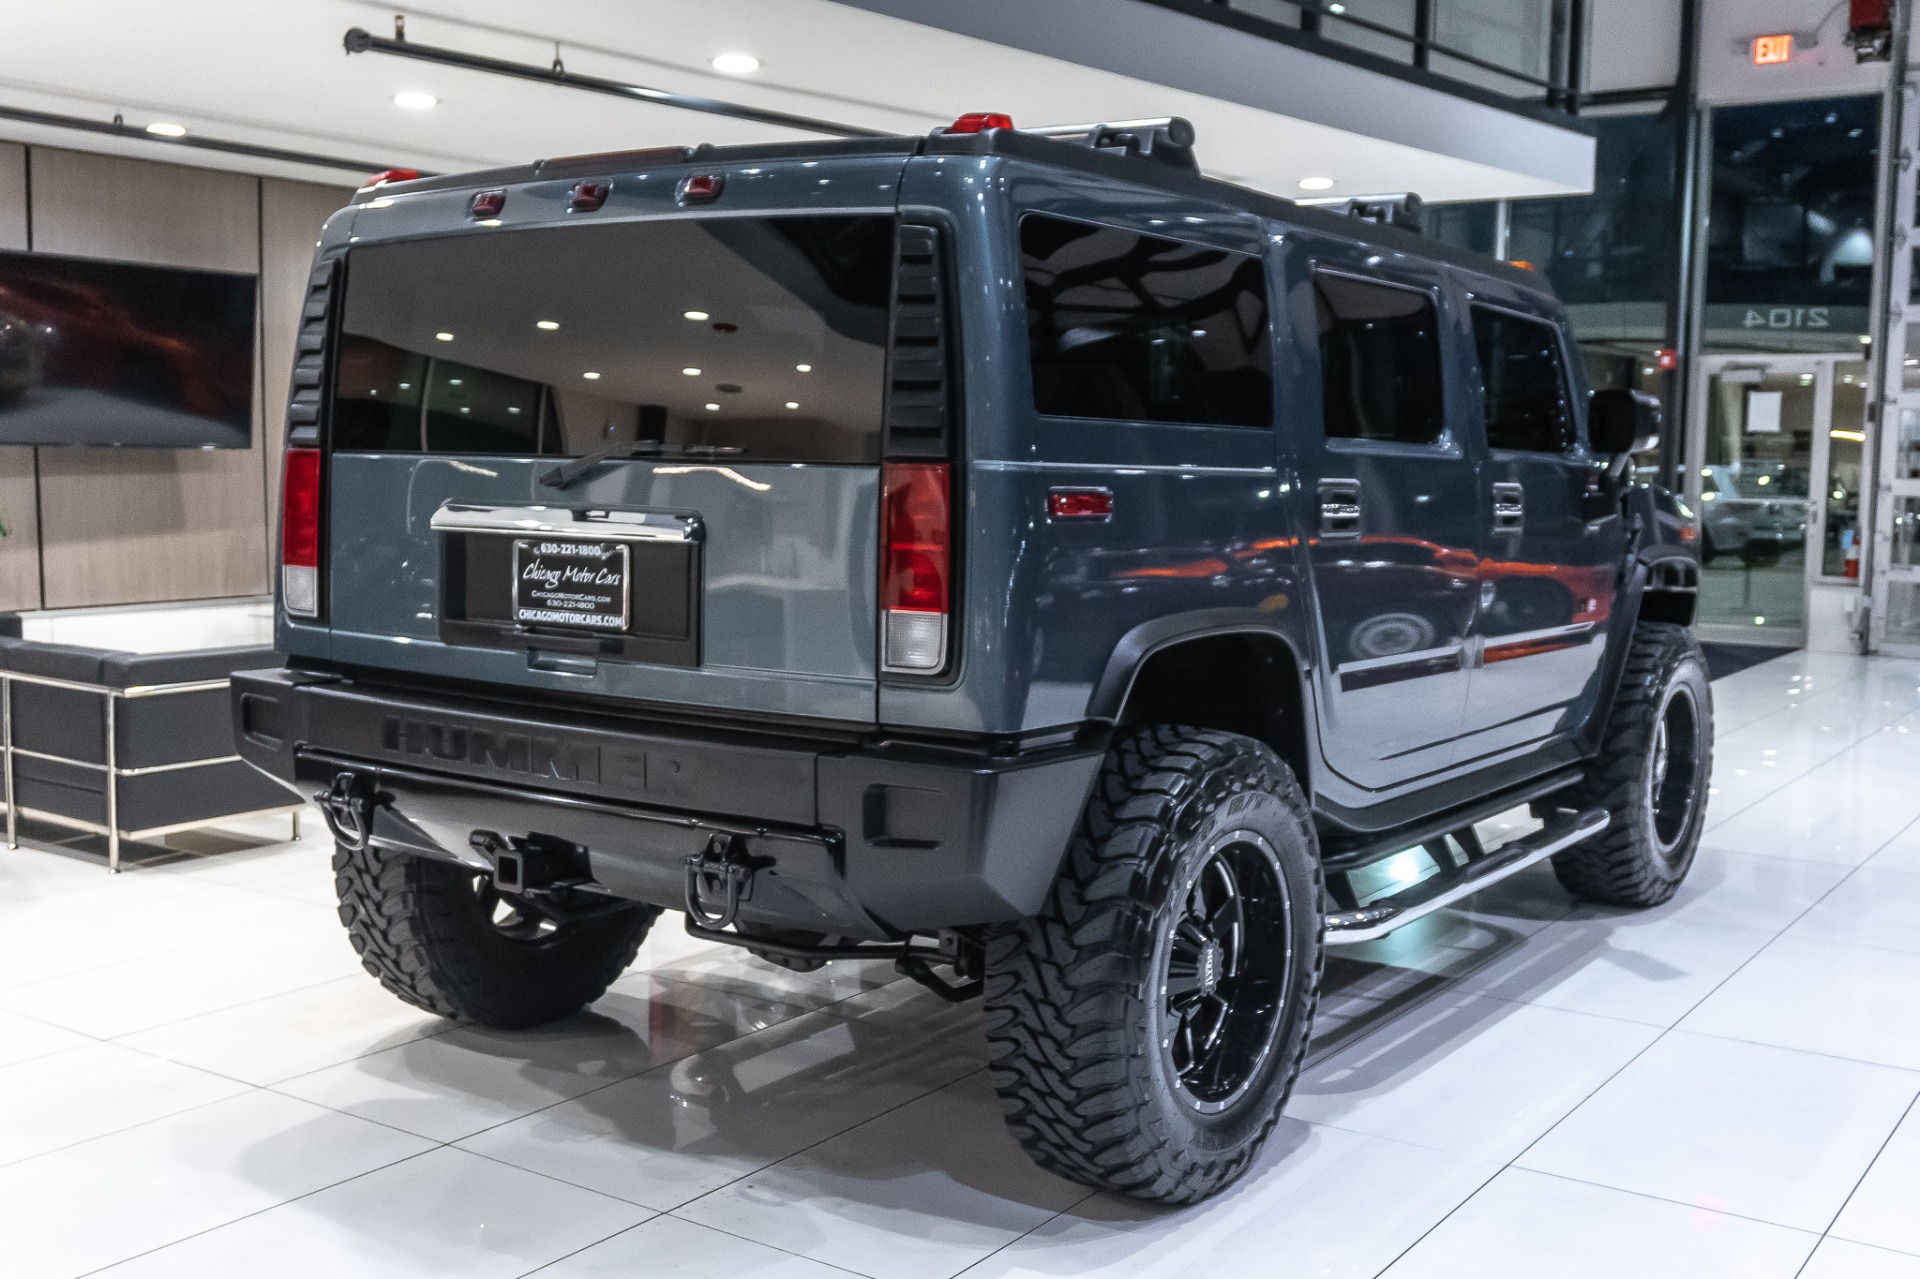 Used 2005 HUMMER H2 SUV RARE STEALTH GRAY! +UPGRADES! VERY CLEAN! For ...